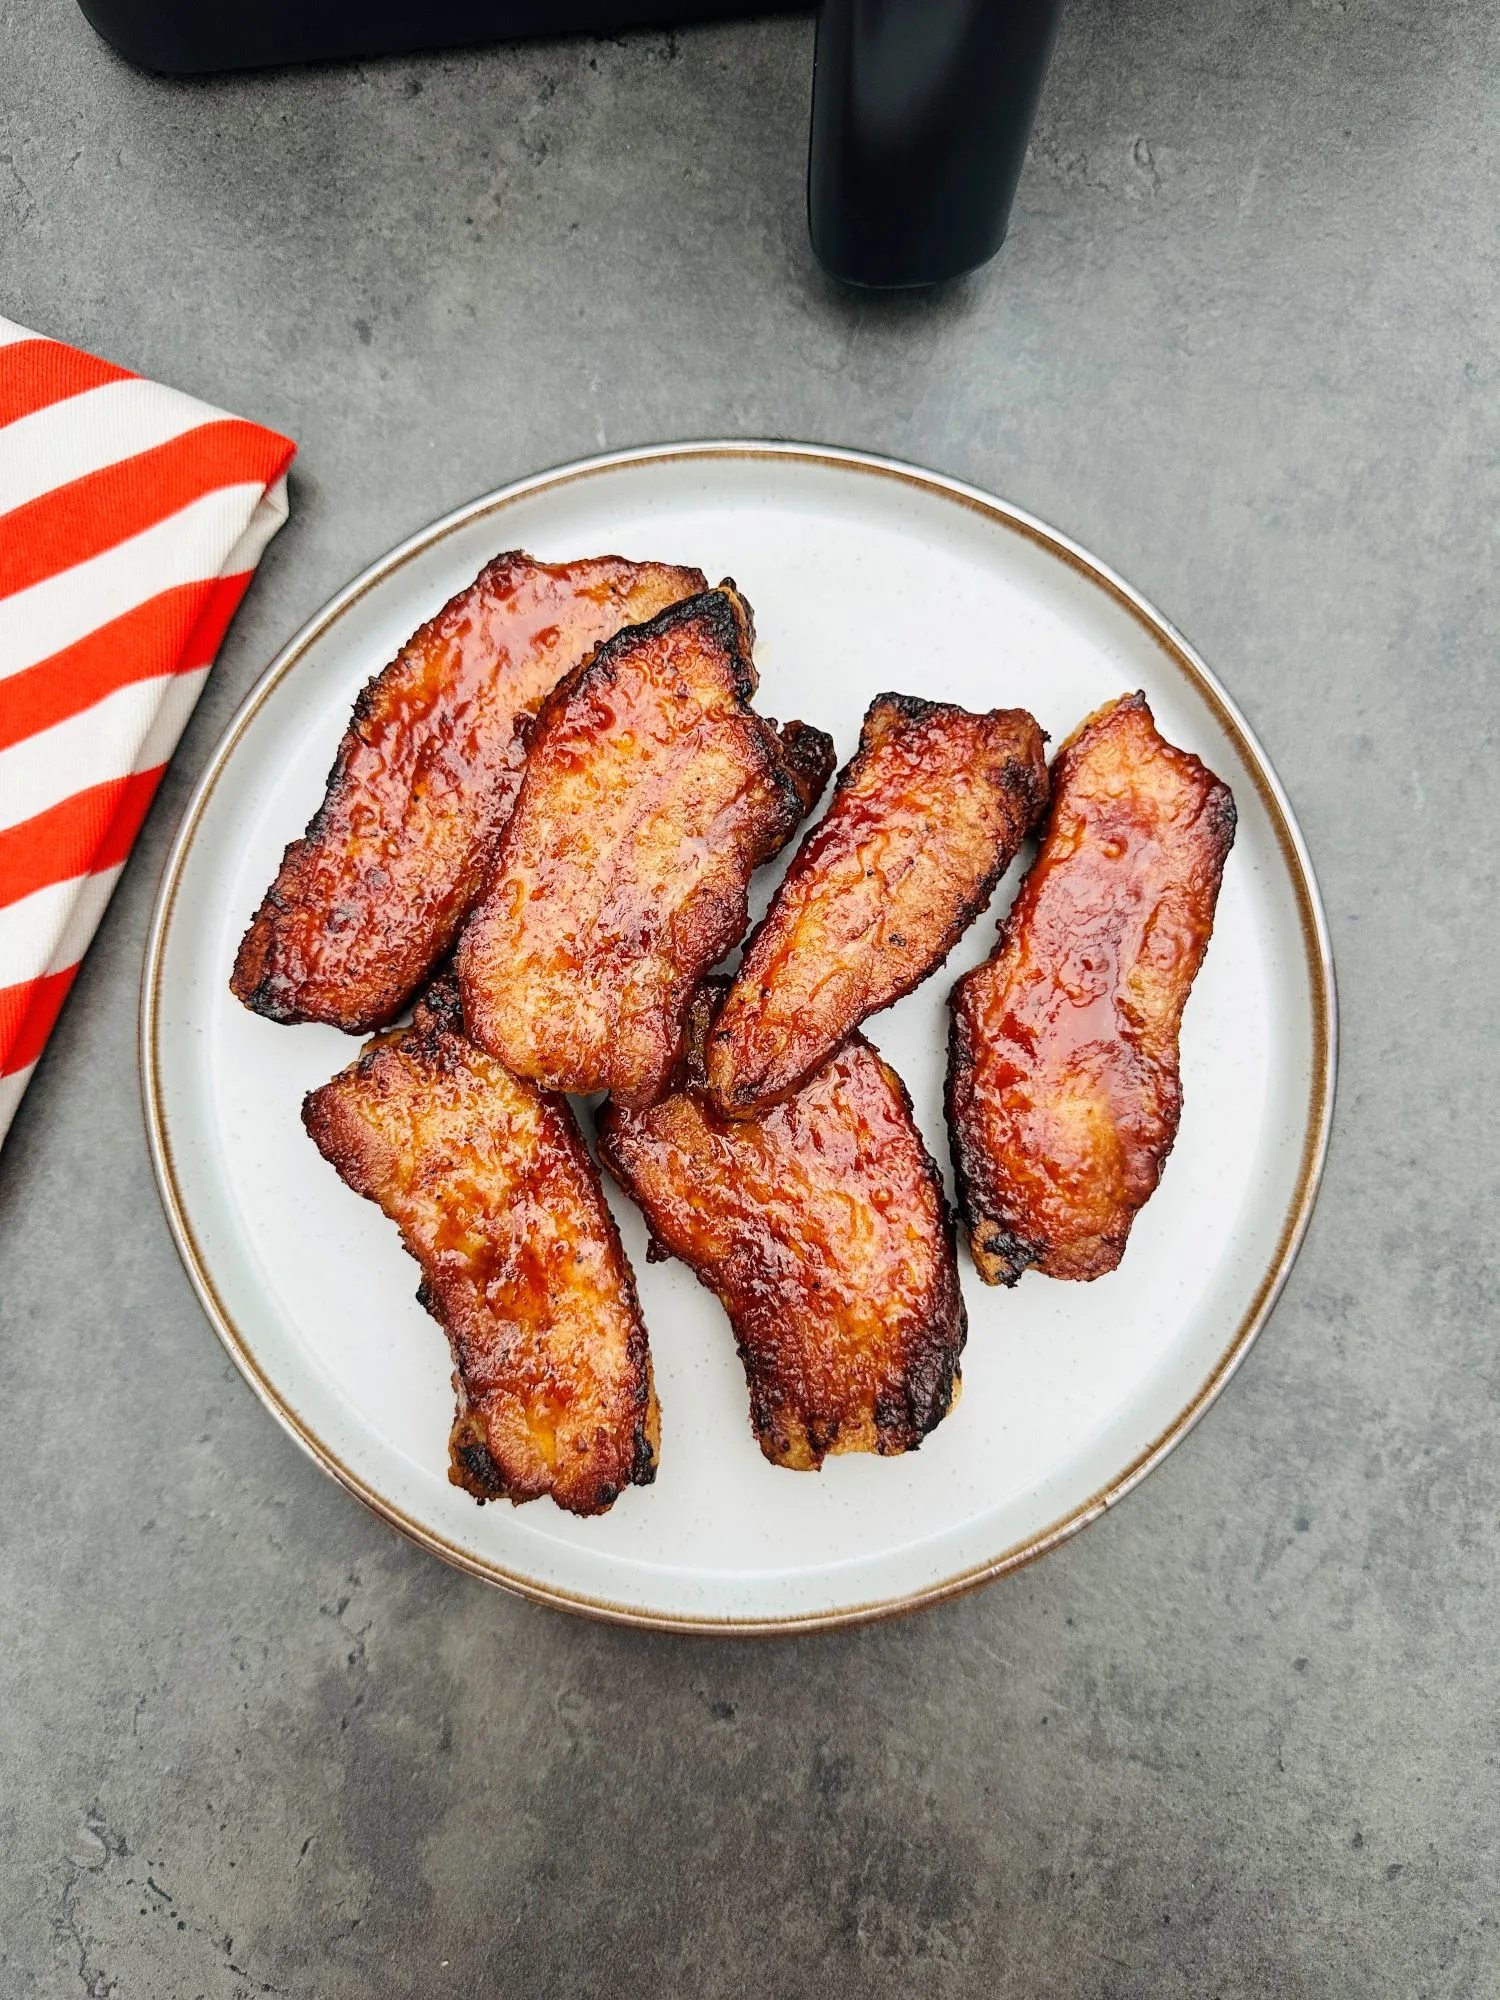 BBQ pork belly slices on a plate next to a red and white striped tea towel and an air fryer